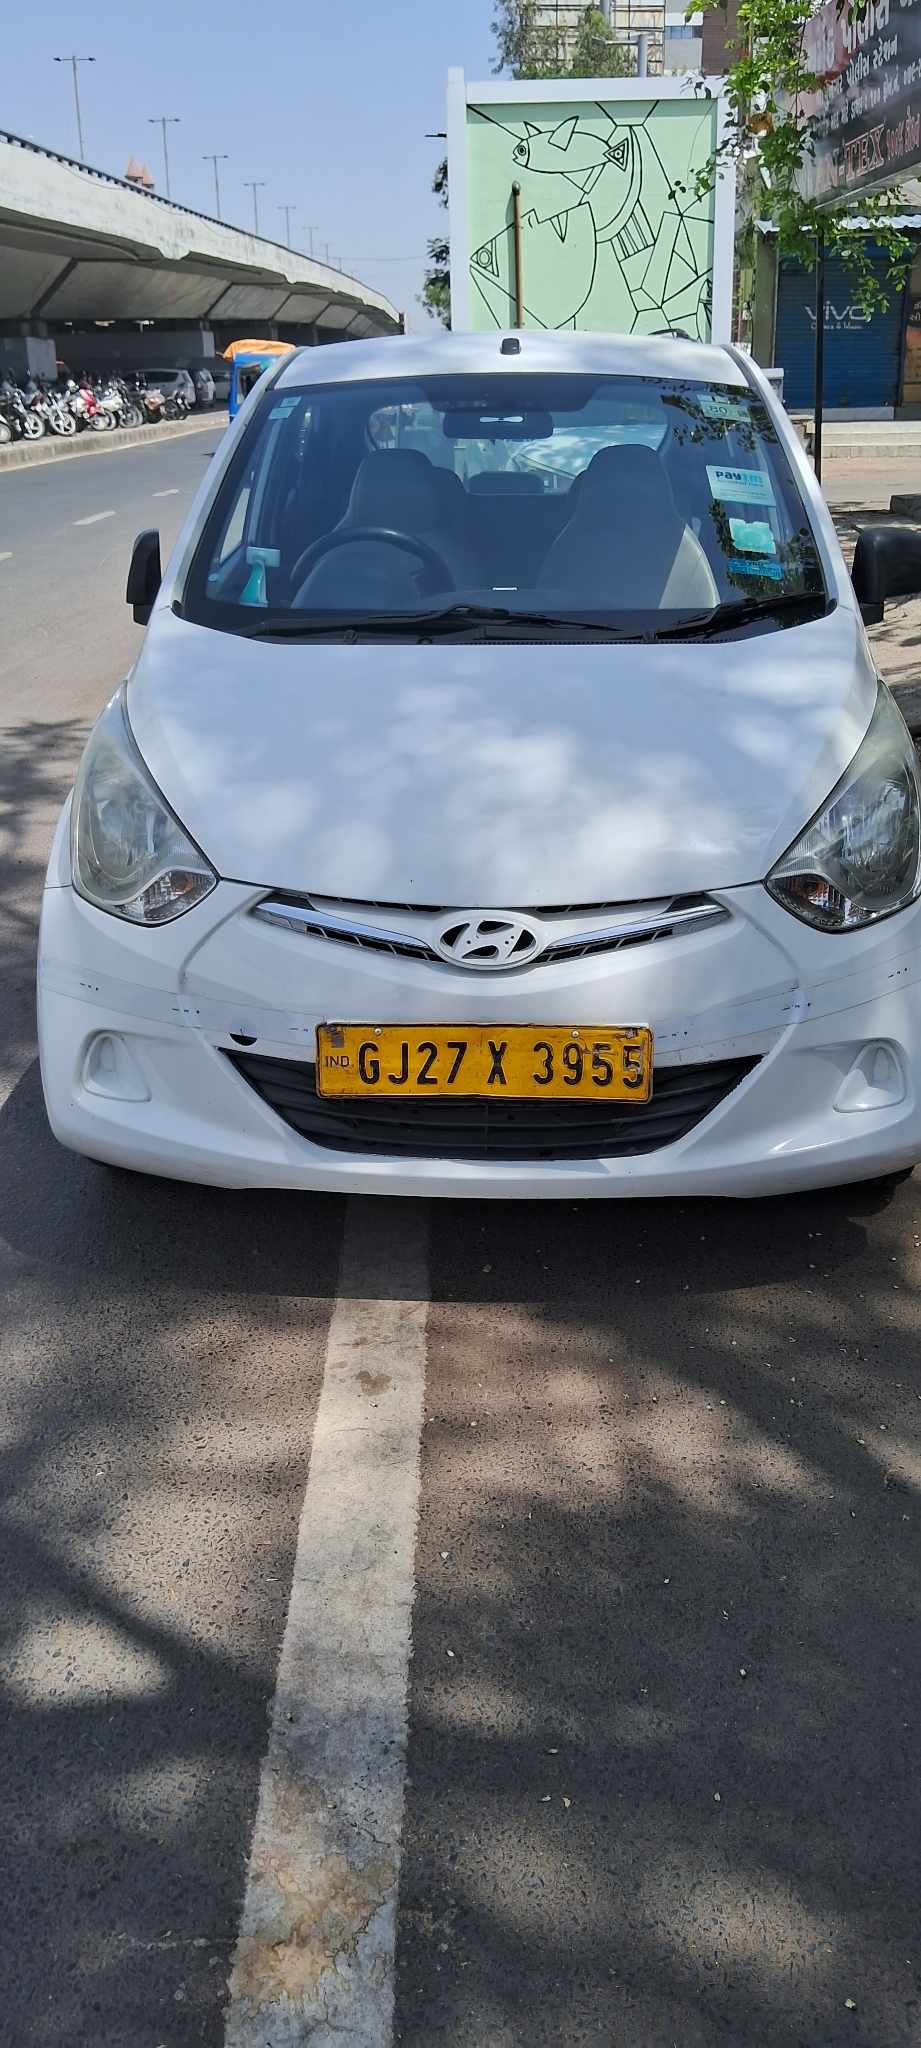 Details View - Hyundai EON photos - reseller,reseller marketplace,advetising your products,reseller bazzar,resellerbazzar.in,india's classified site,Hyundai eon